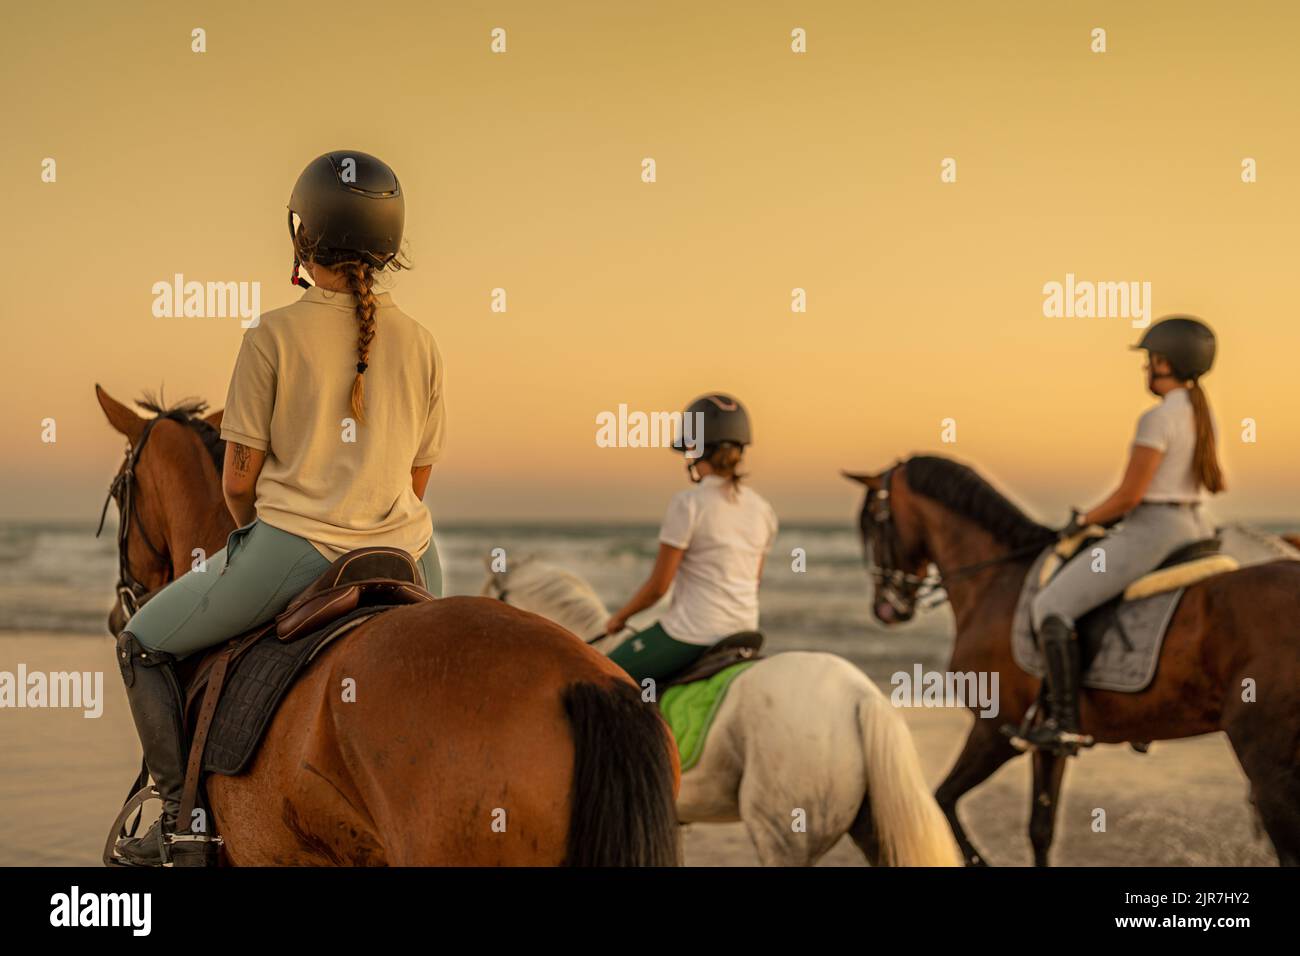 young woman with braid riding a horse on the beach next to 2 young riders Stock Photo